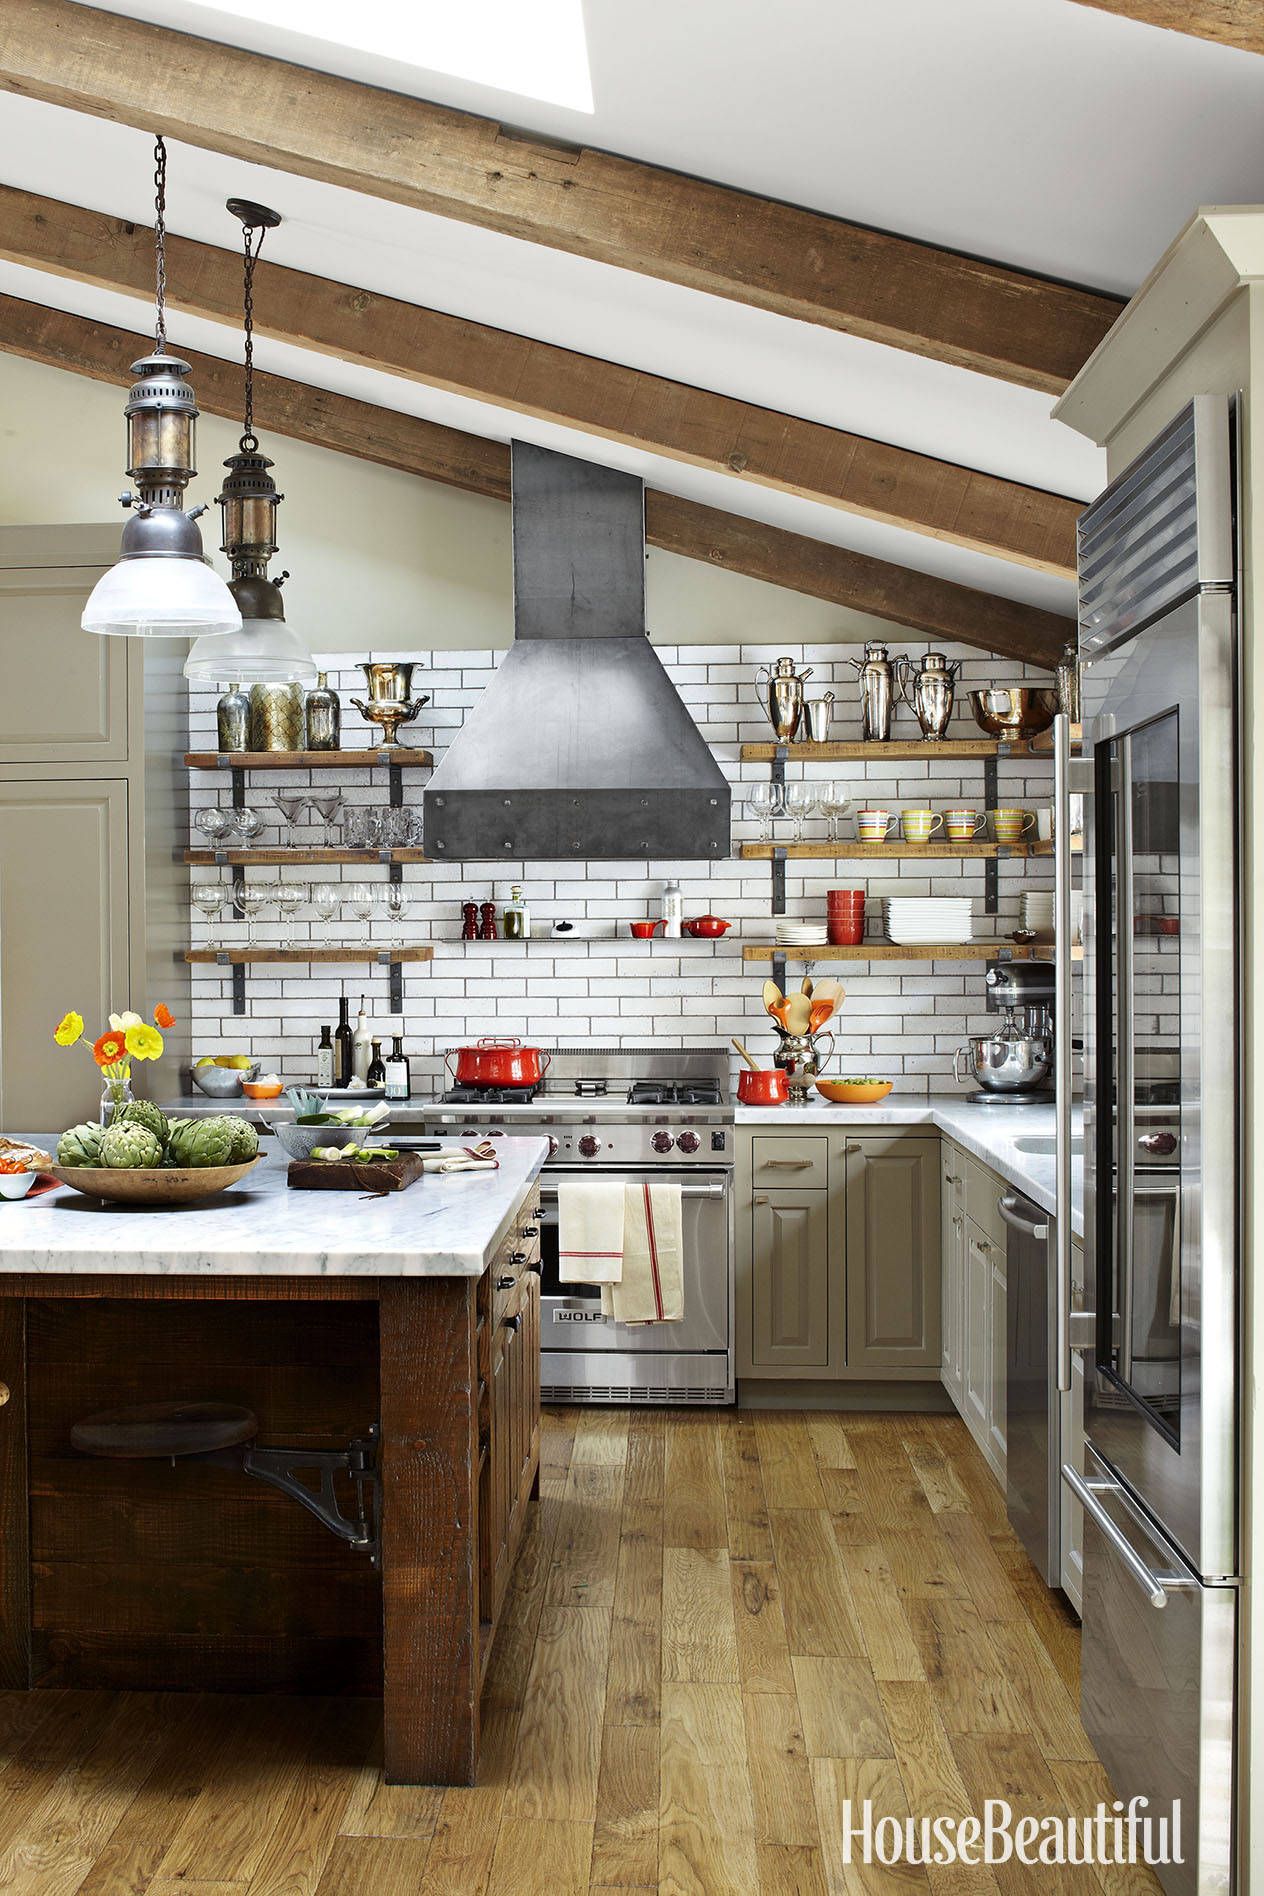 Open Shelving These 15 Kitchens, Commercial Kitchen Shelving Ideas